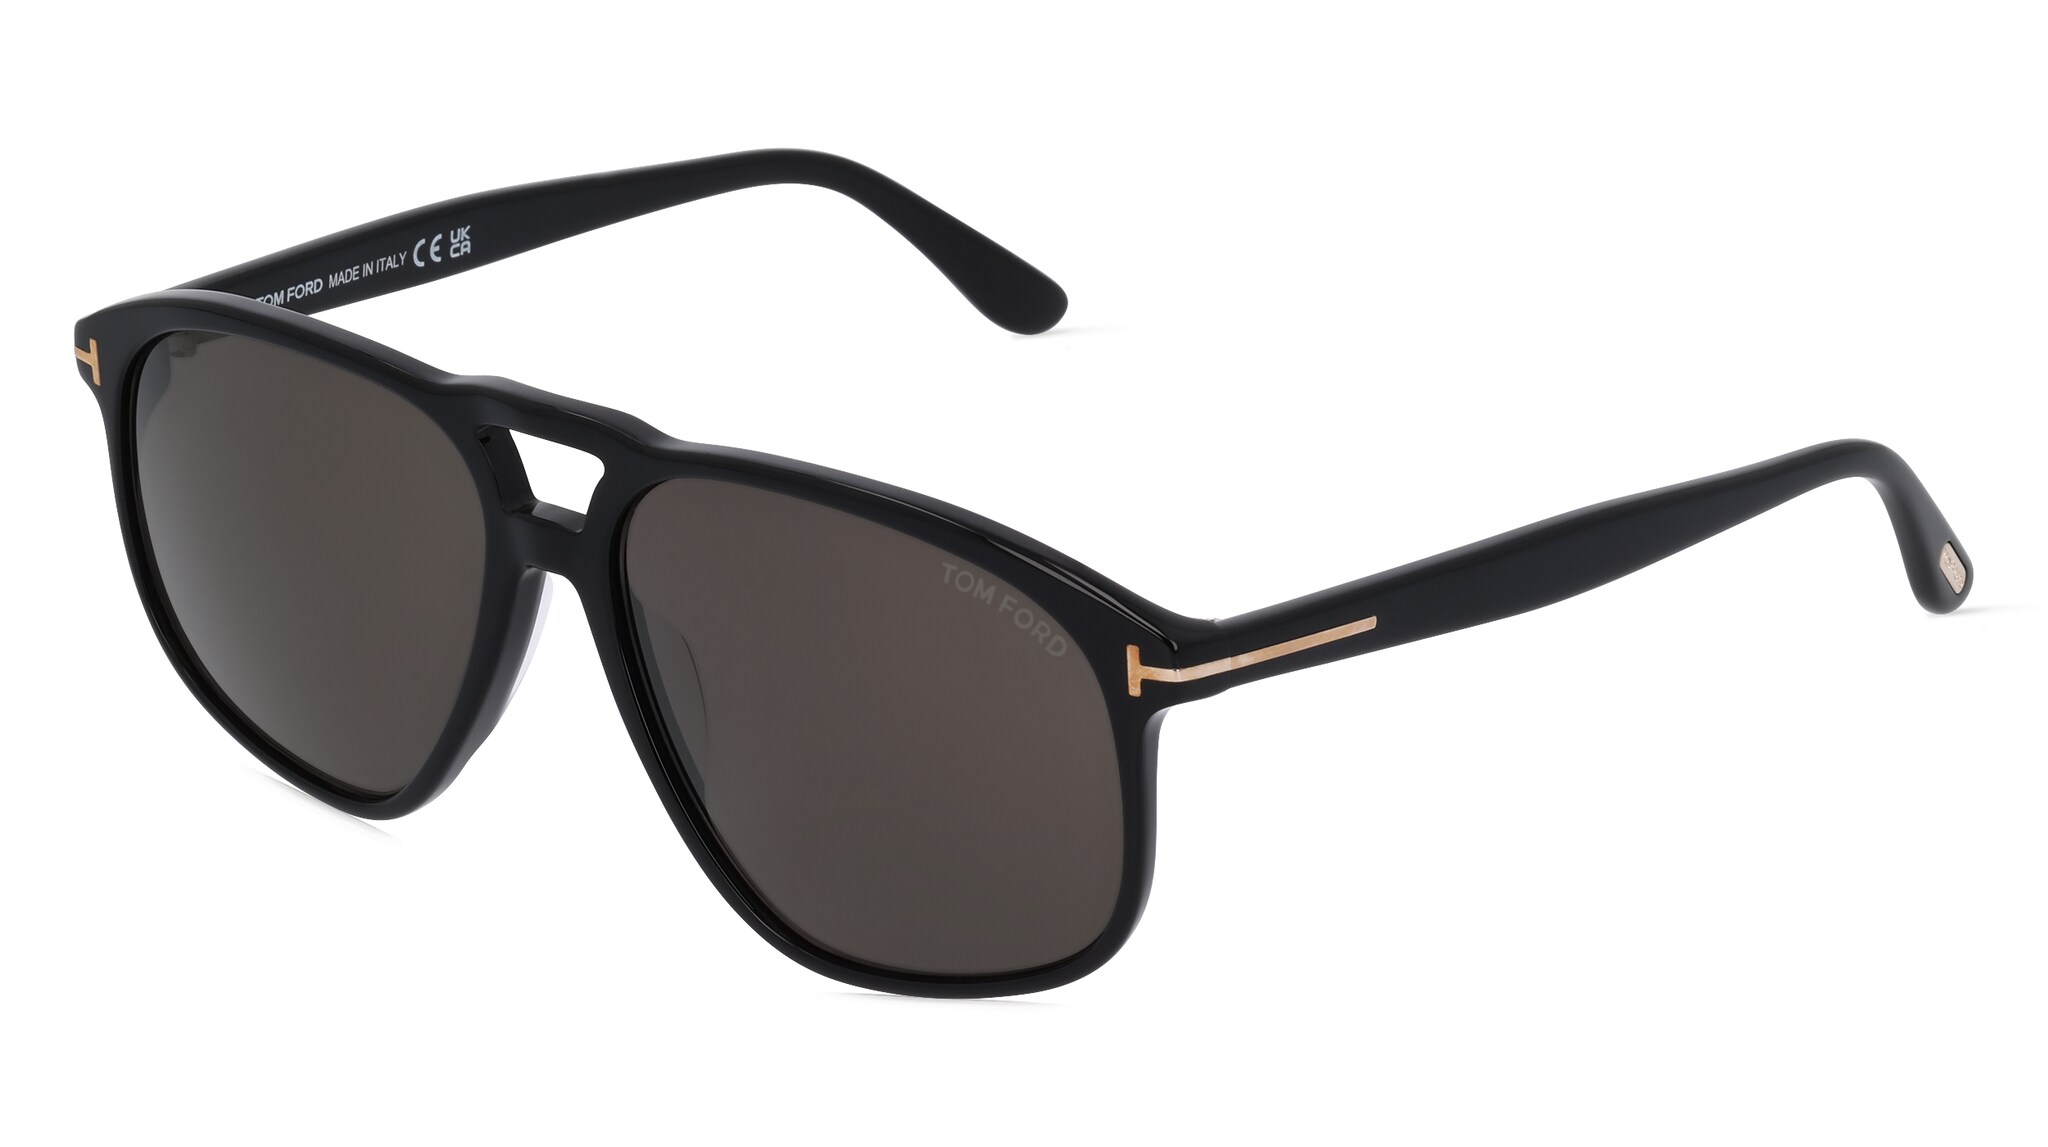 Tom Ford FT1000 PIERRE-02